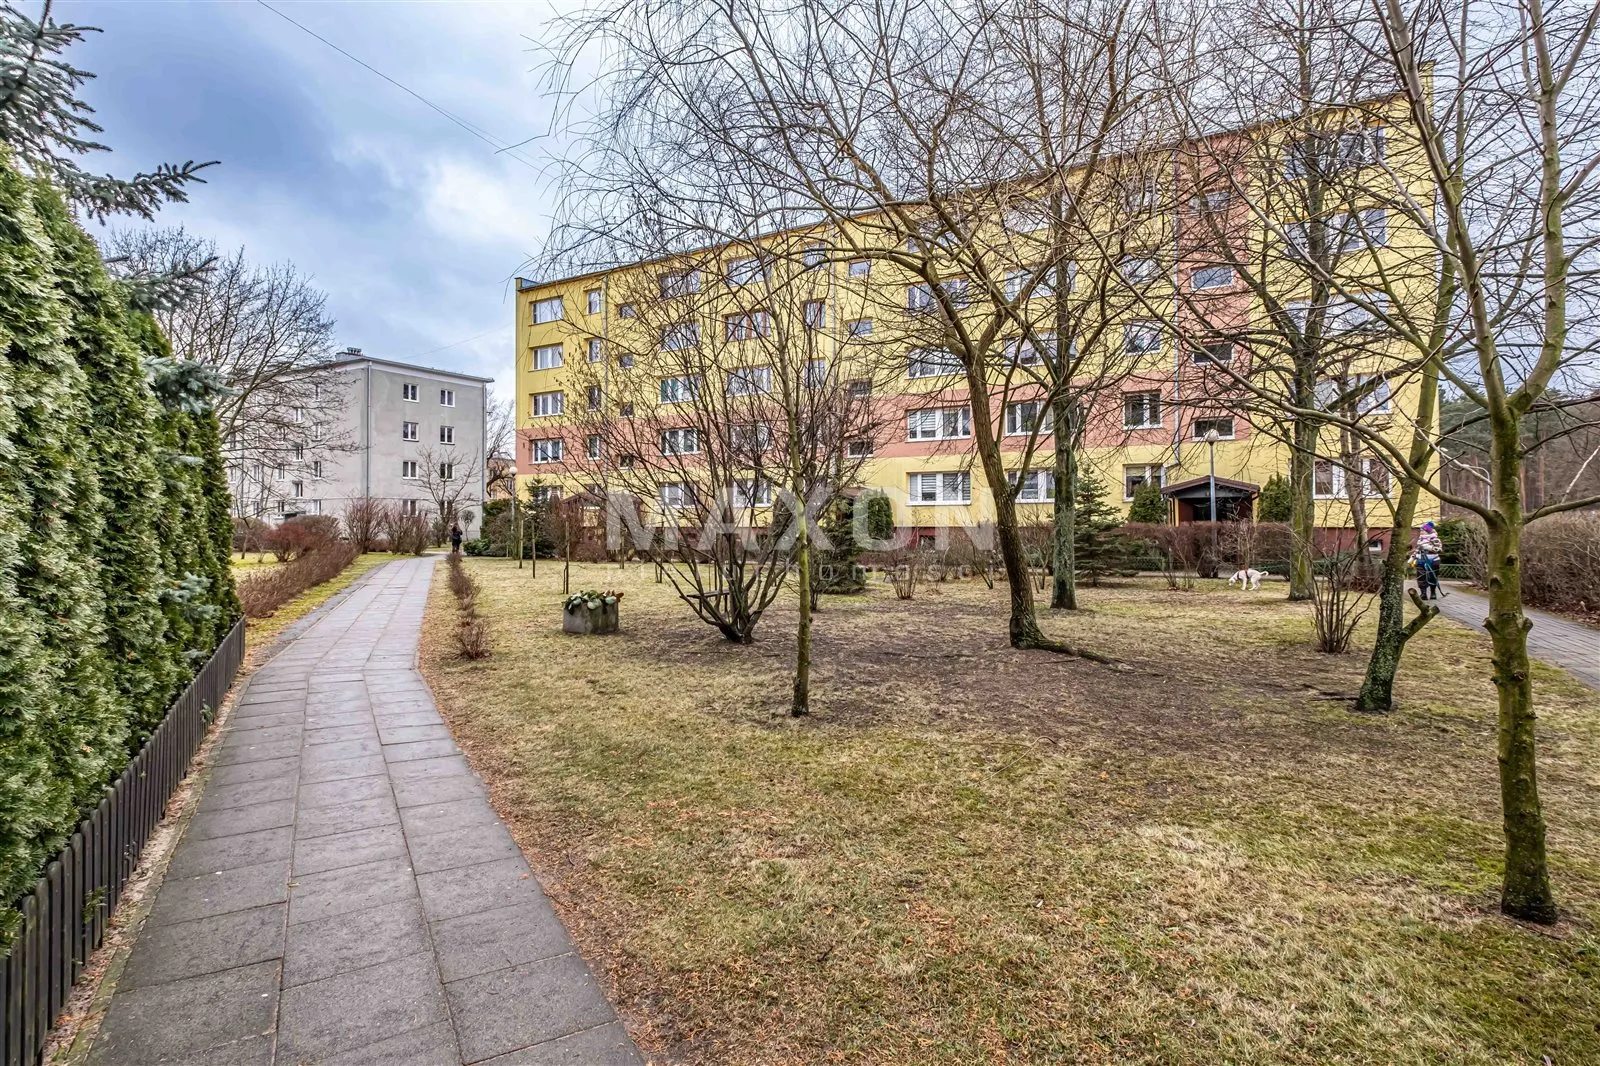 Modern 3-Room Apartment - Ideal Location in Warsaw